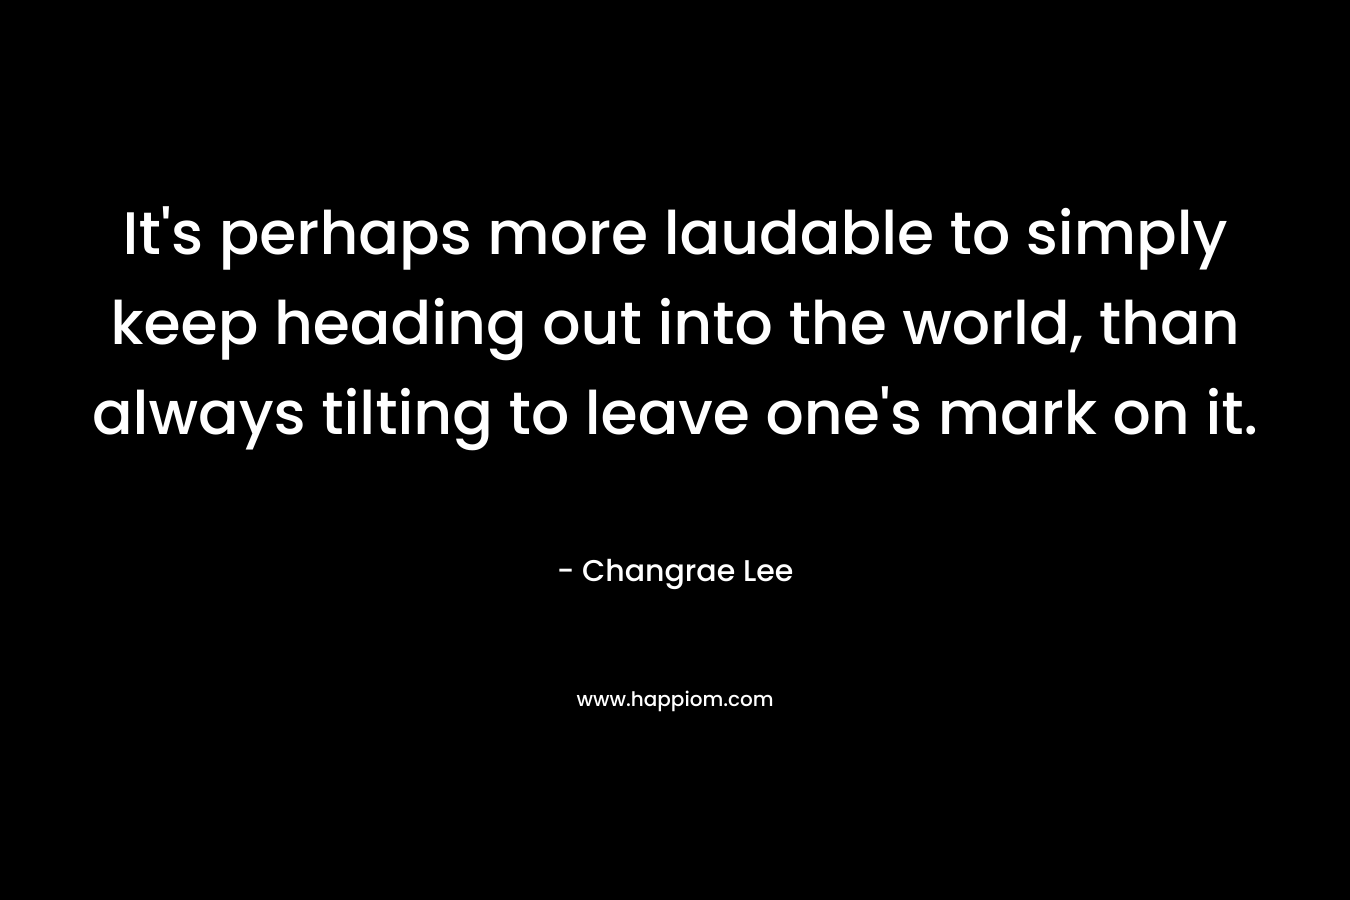 It’s perhaps more laudable to simply keep heading out into the world, than always tilting to leave one’s mark on it. – Changrae Lee